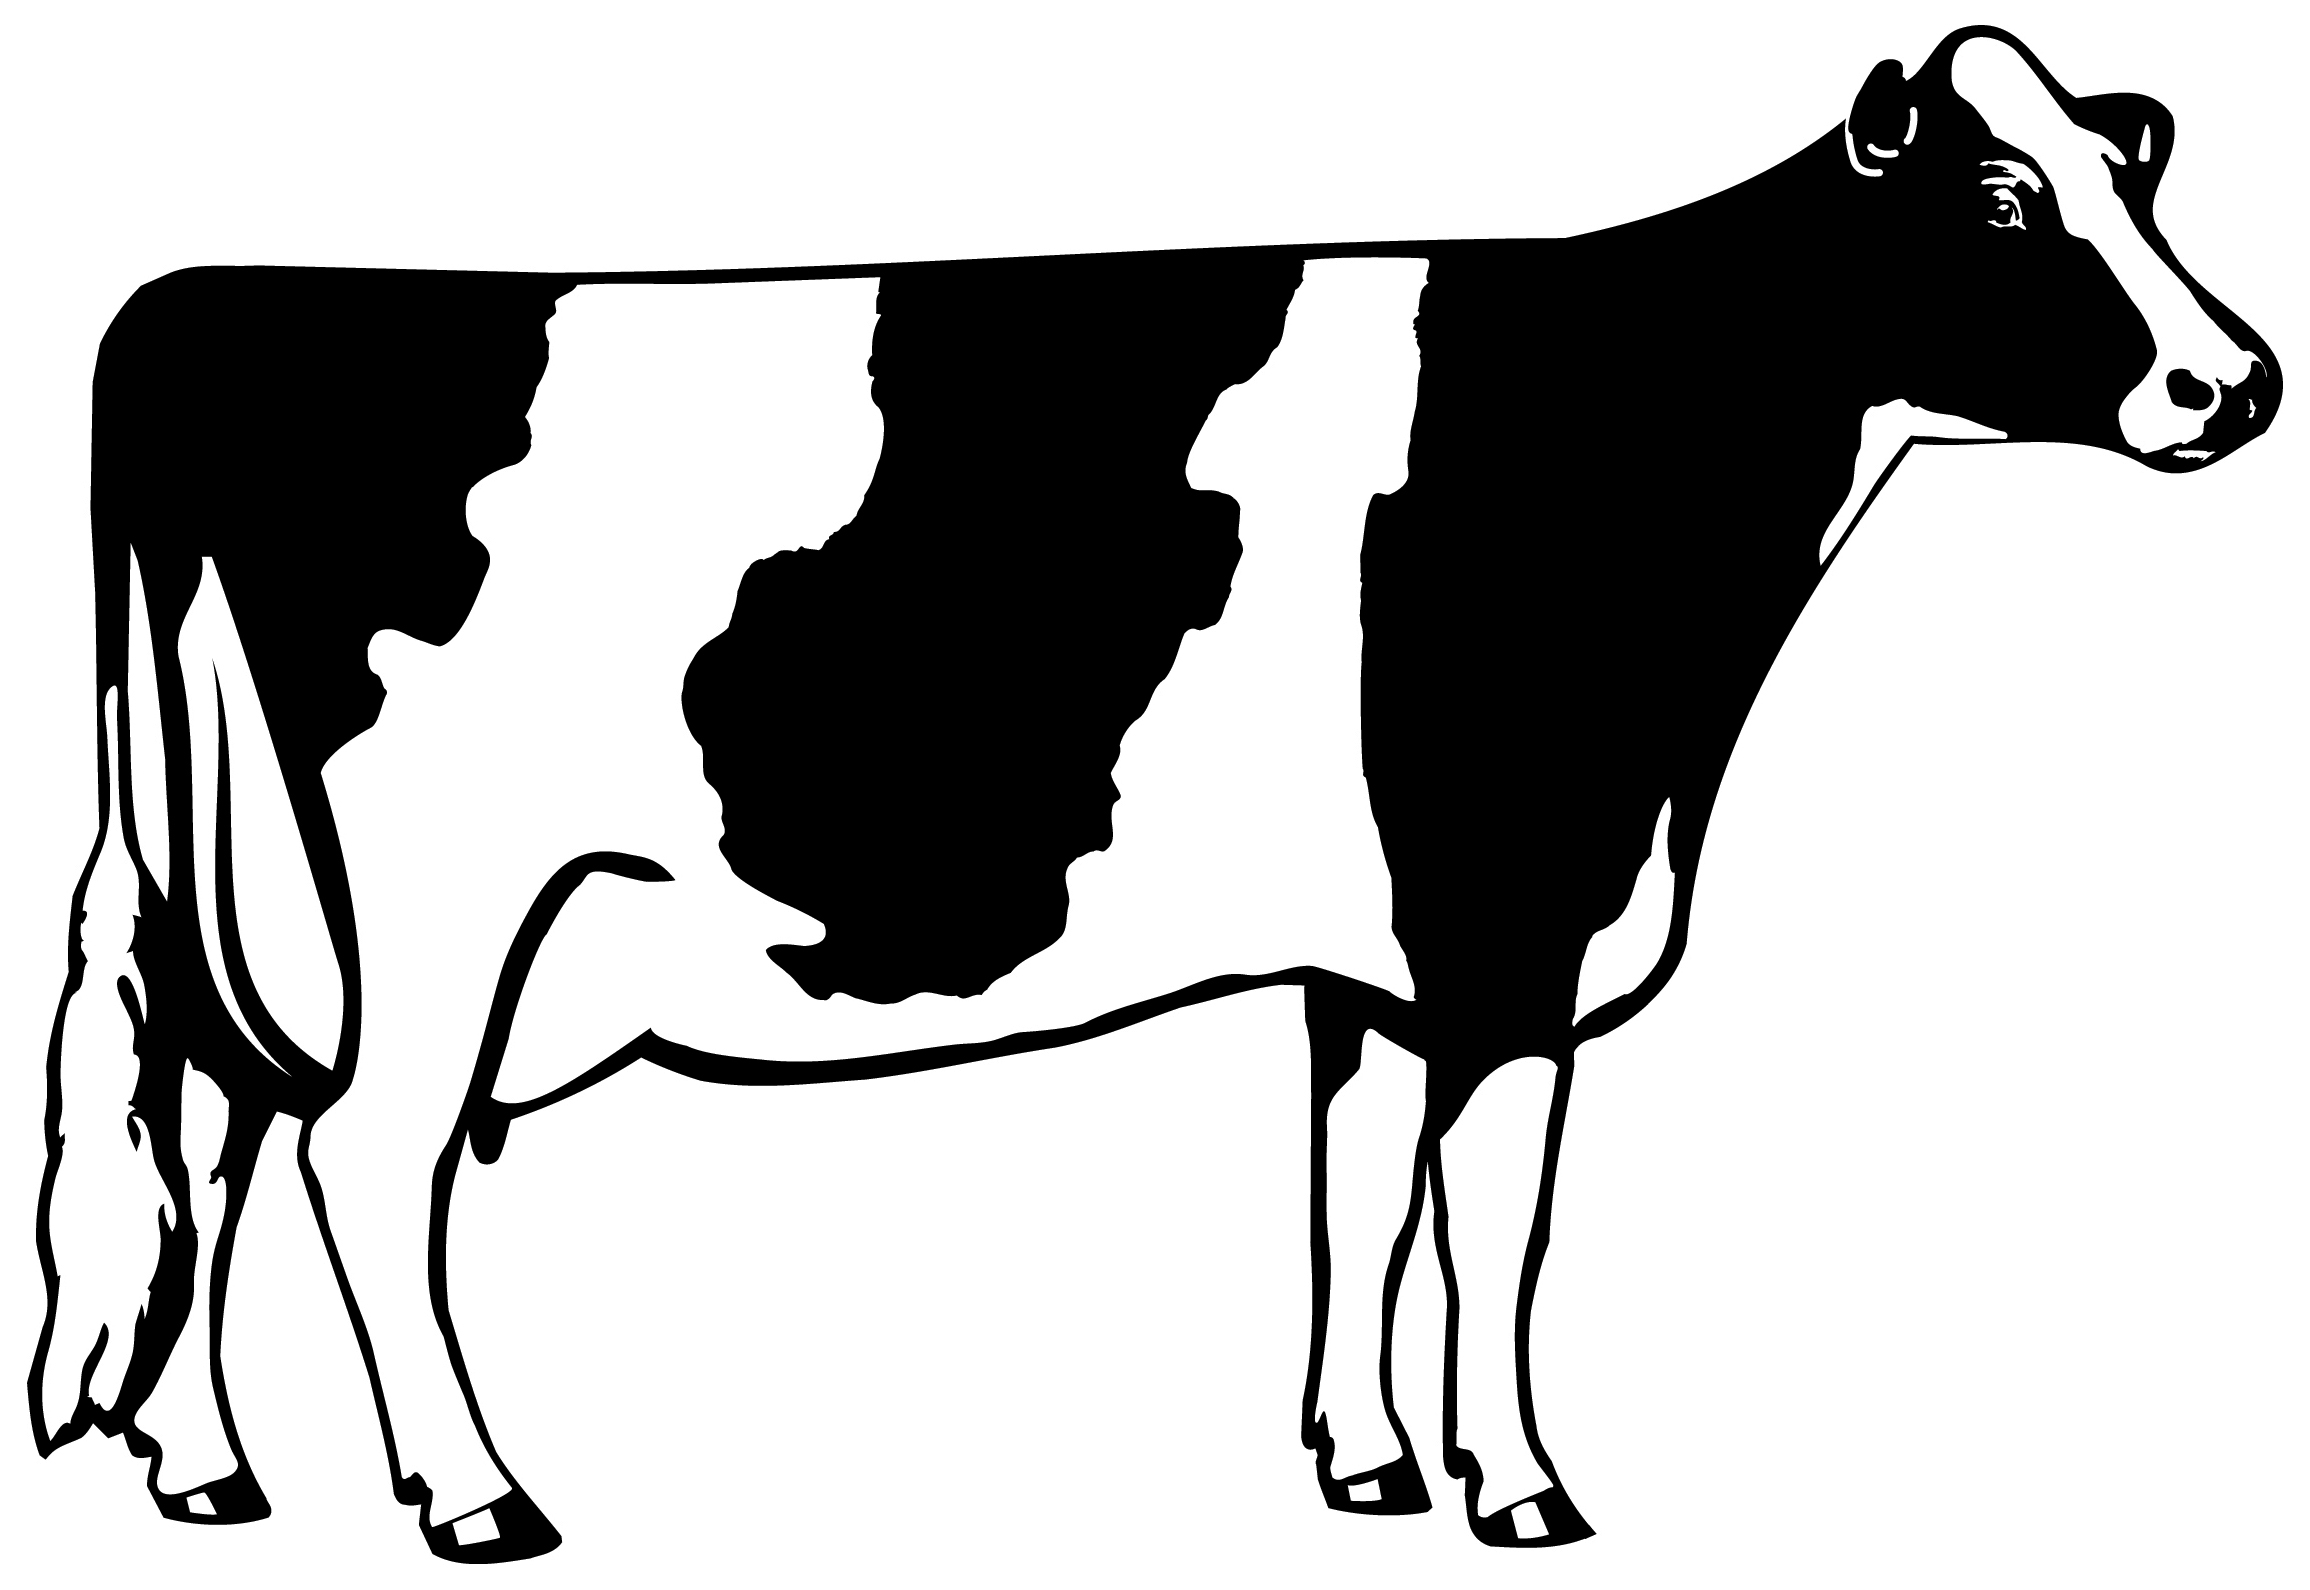 Black and white cow clip art images crazy gallery leechh link site